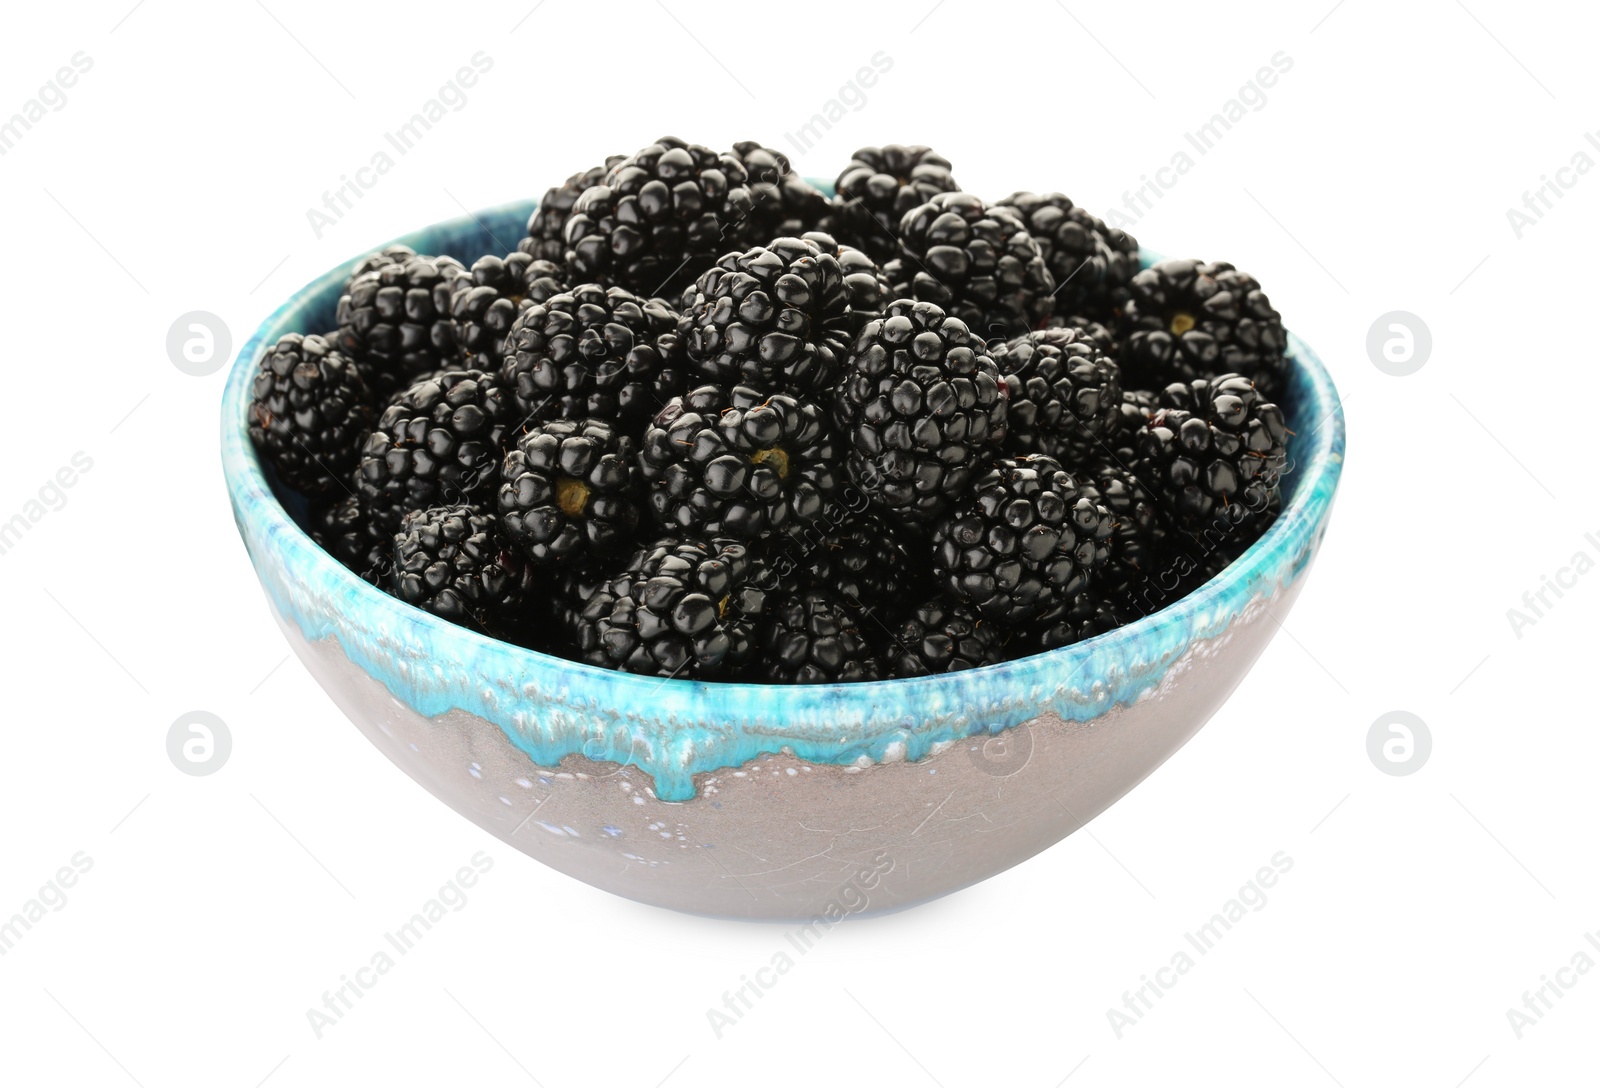 Photo of Tasty ripe blackberries in bowl isolated on white